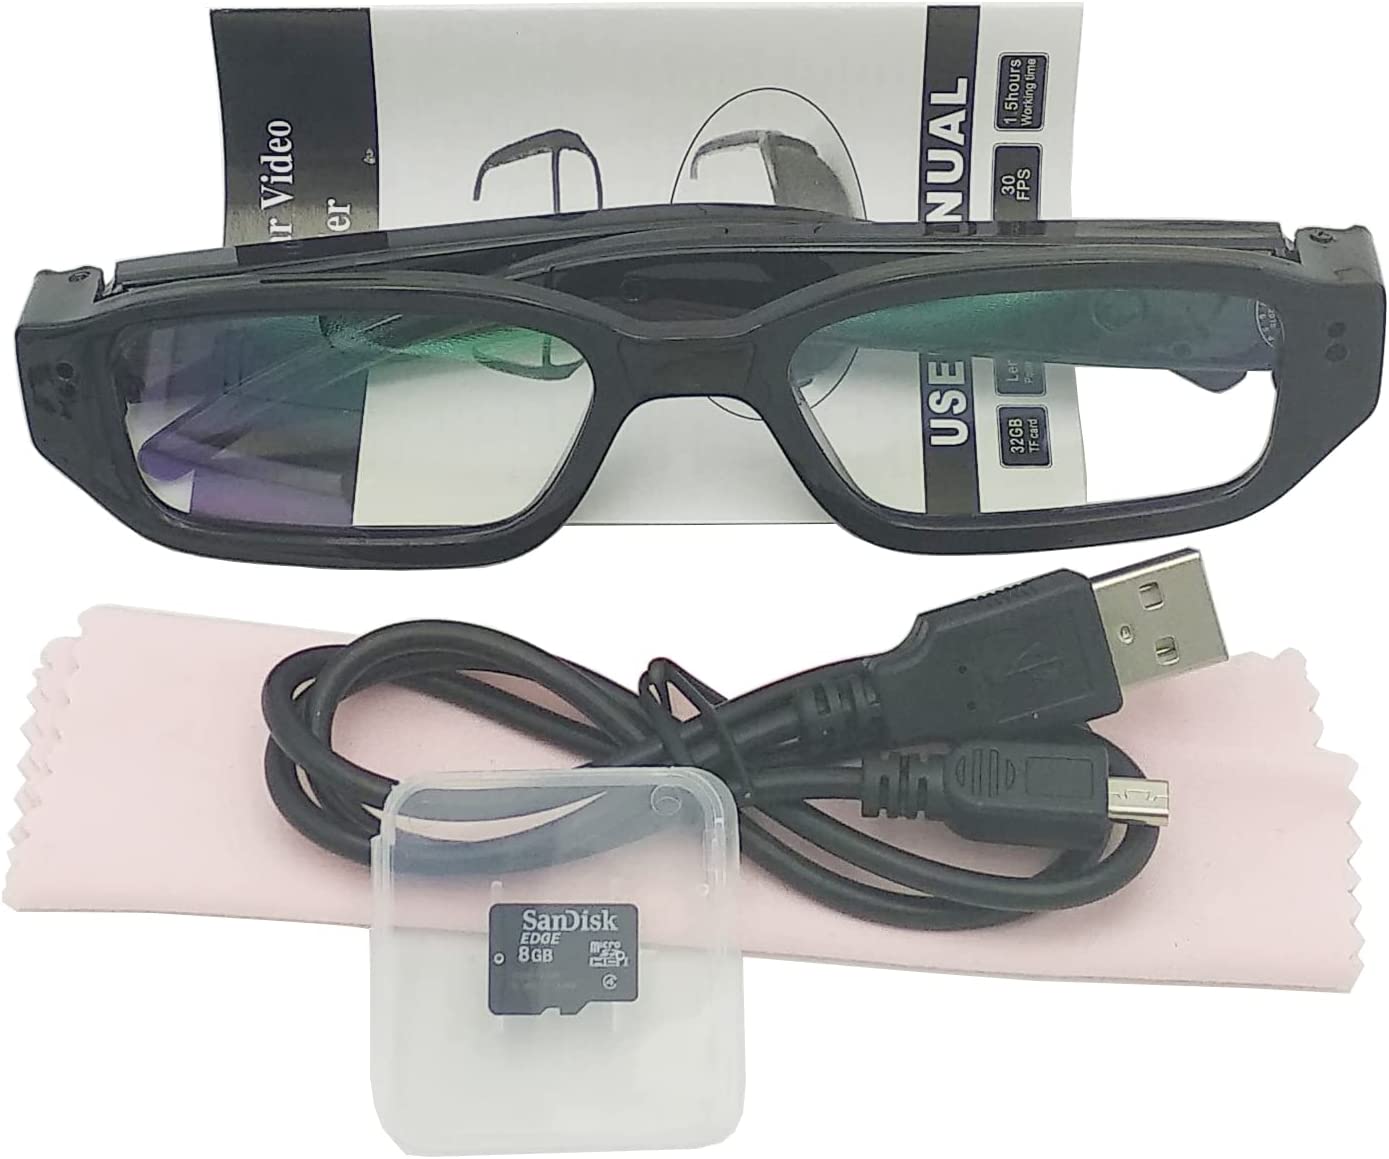  Hereta Spy Camera Glasses with Video Support Up to 32GB TF  Card 1080P Video Camera Glasses Portable Video Recorder : Electronics